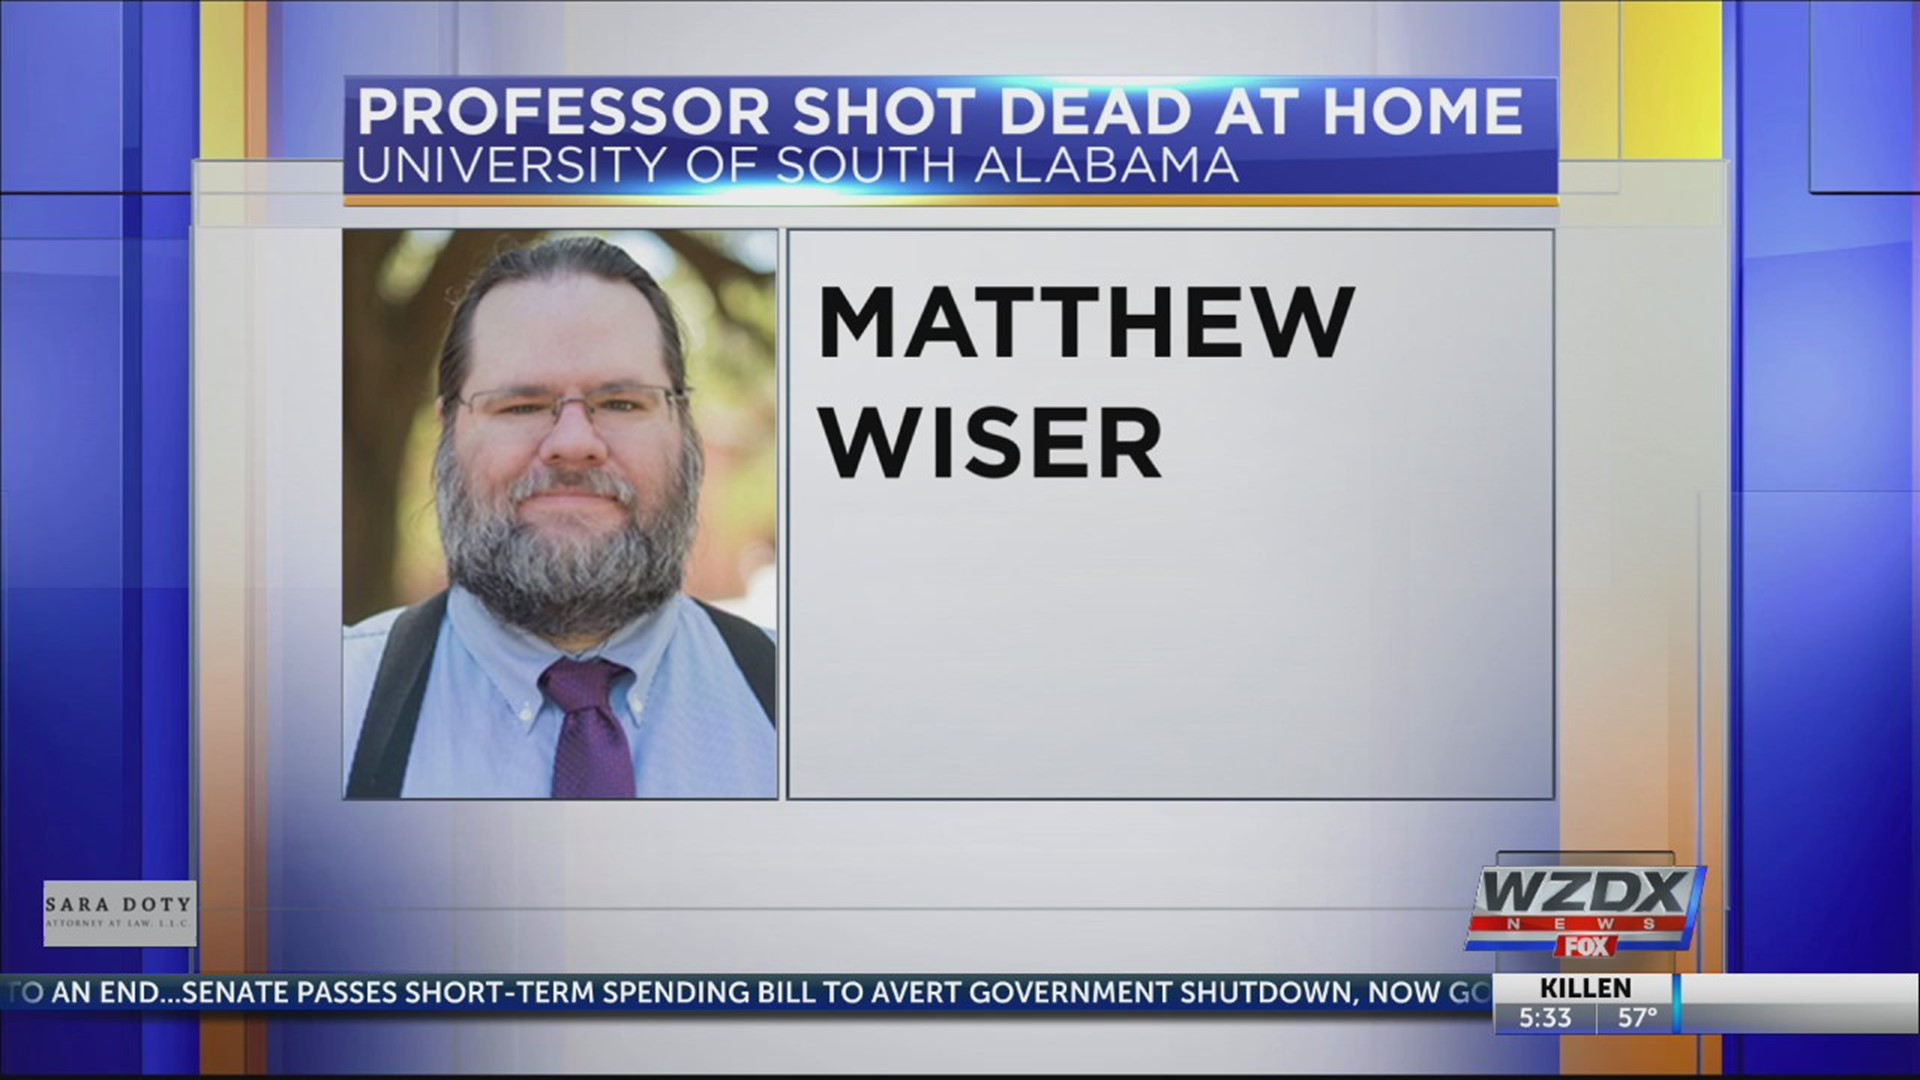 A University of South Alabama teacher was found shot to death inside his home after police went to check on him because of co-workers’ concerns, authorities said Thursday.